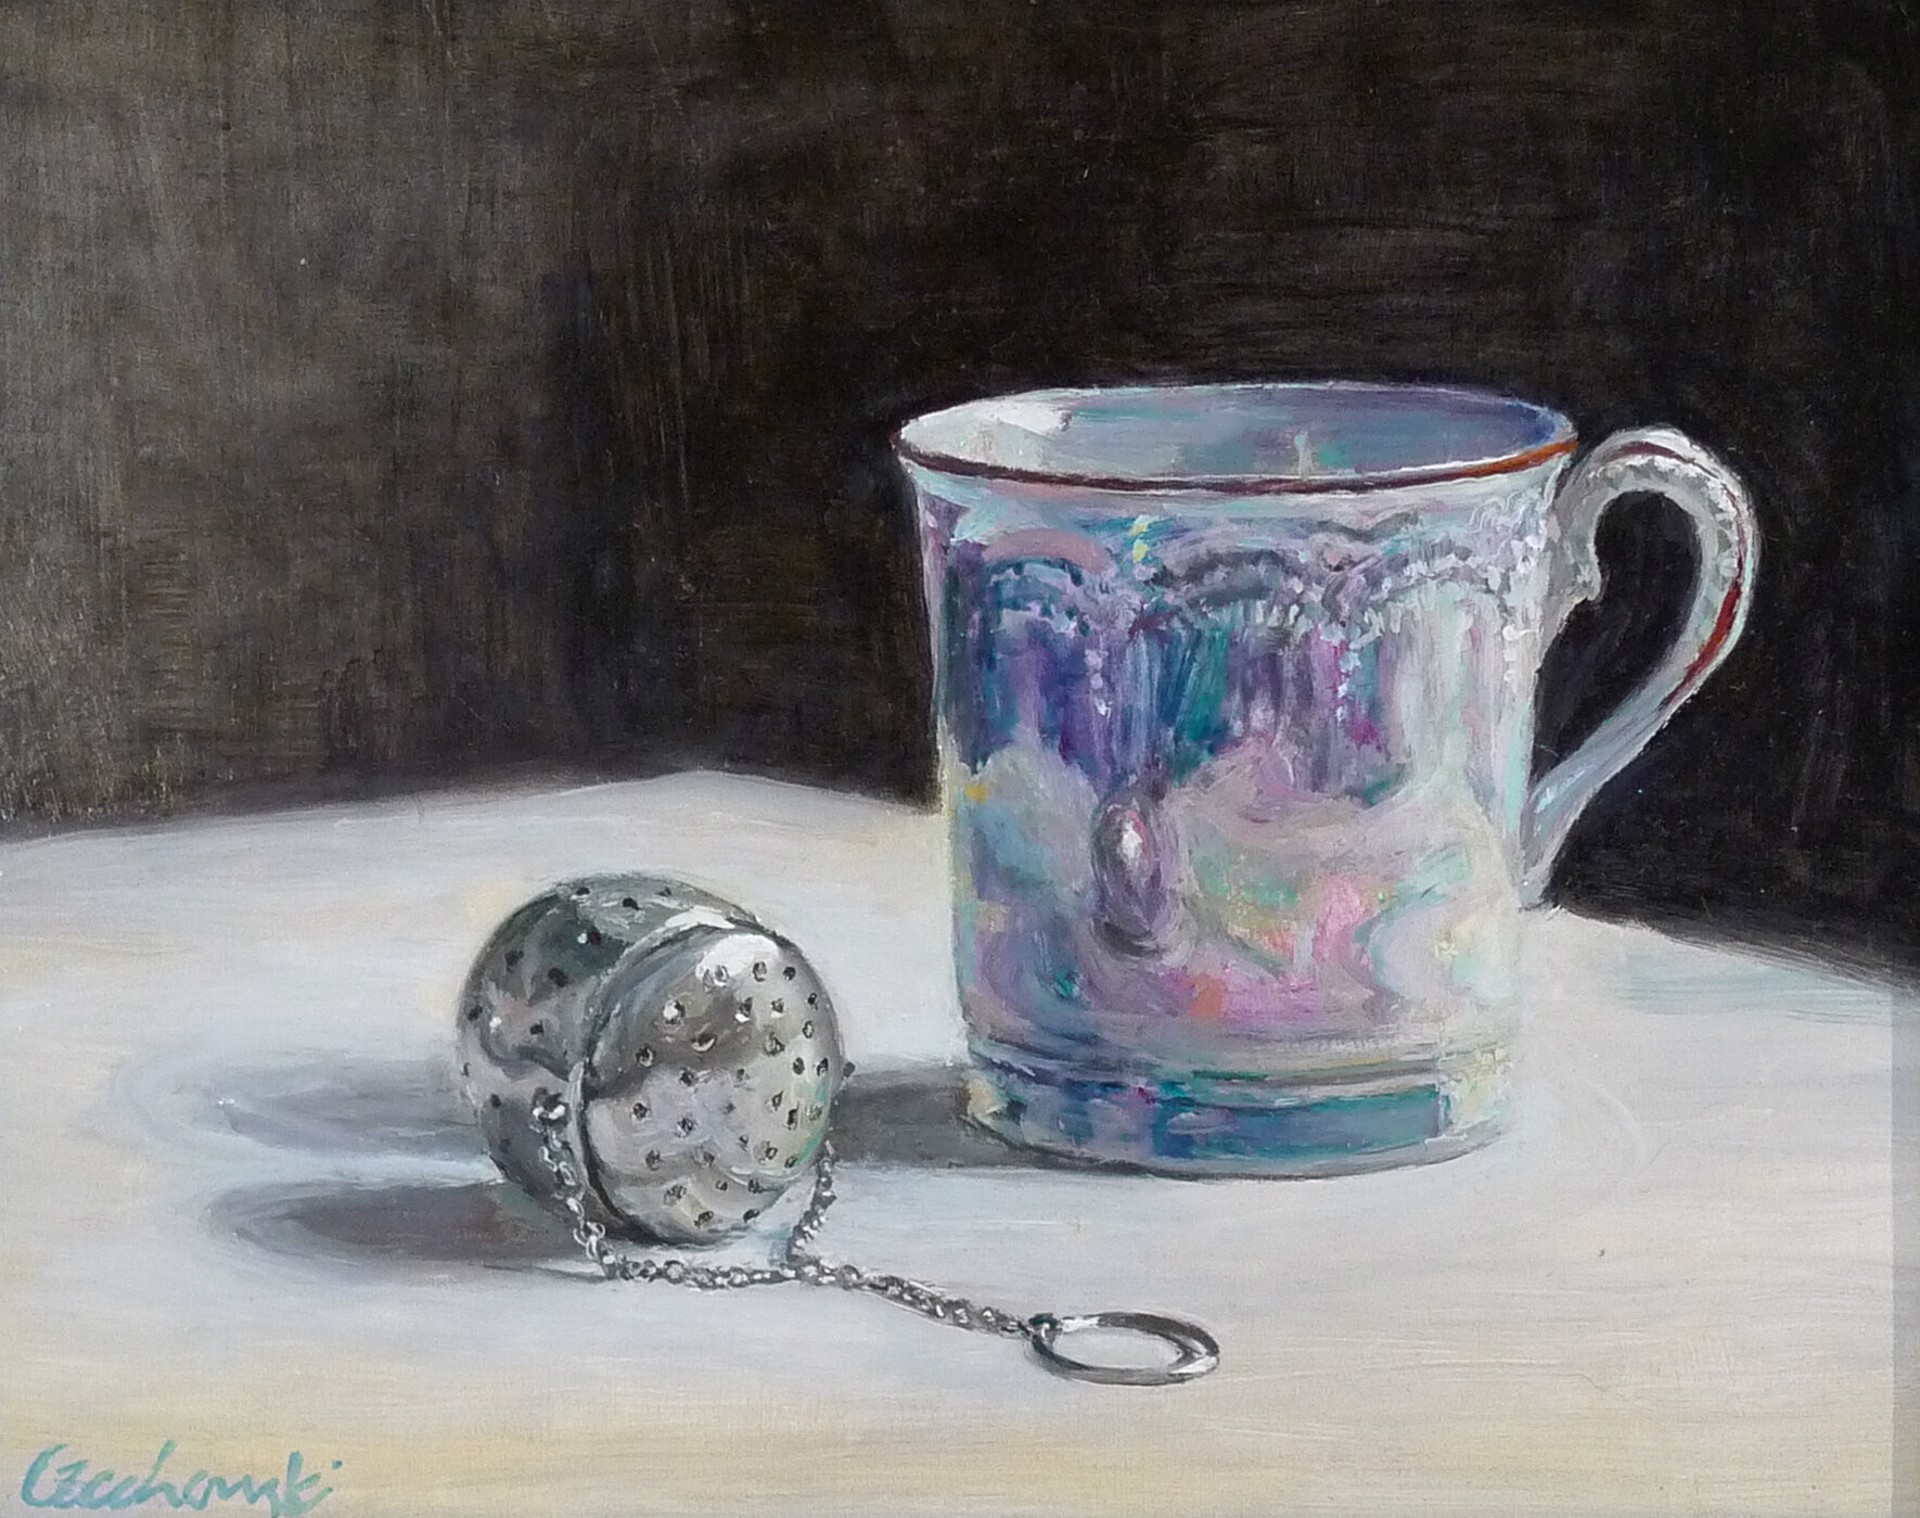 Silver Tea Ball with Lusterware Cup by Alicia Czechowski